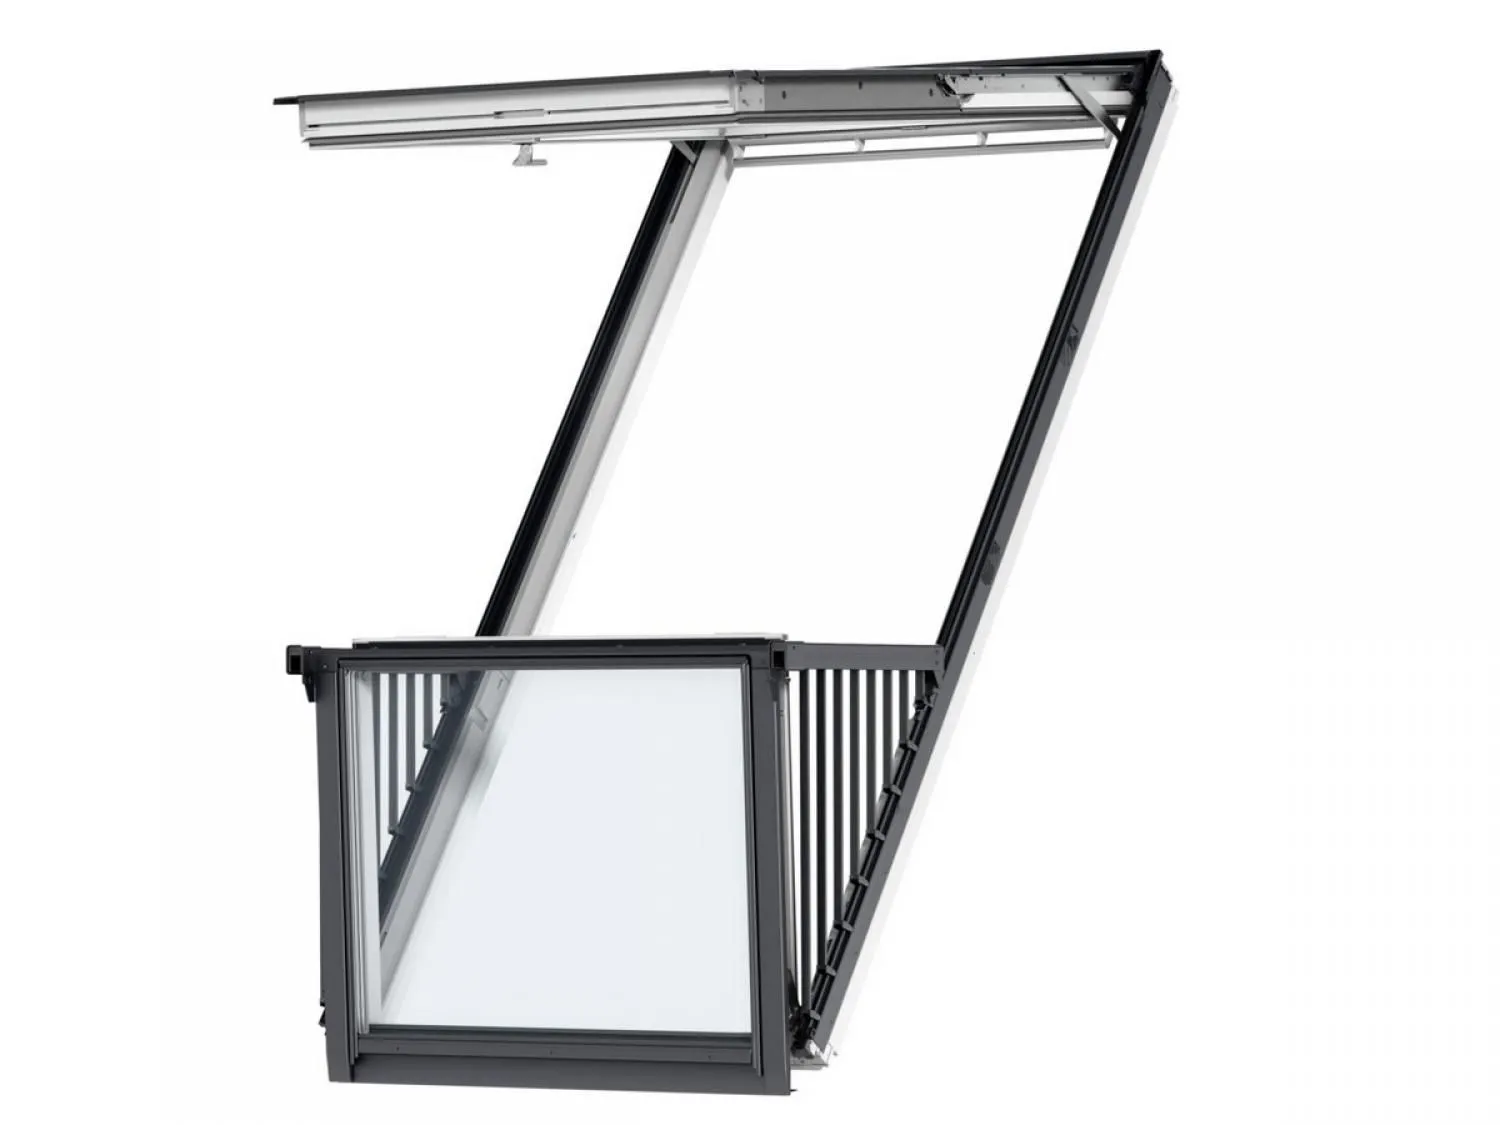 Velux Double CABRIO Balcony Roof Window  1980 x 2520   White Painted   GDL PK19 SK0L222